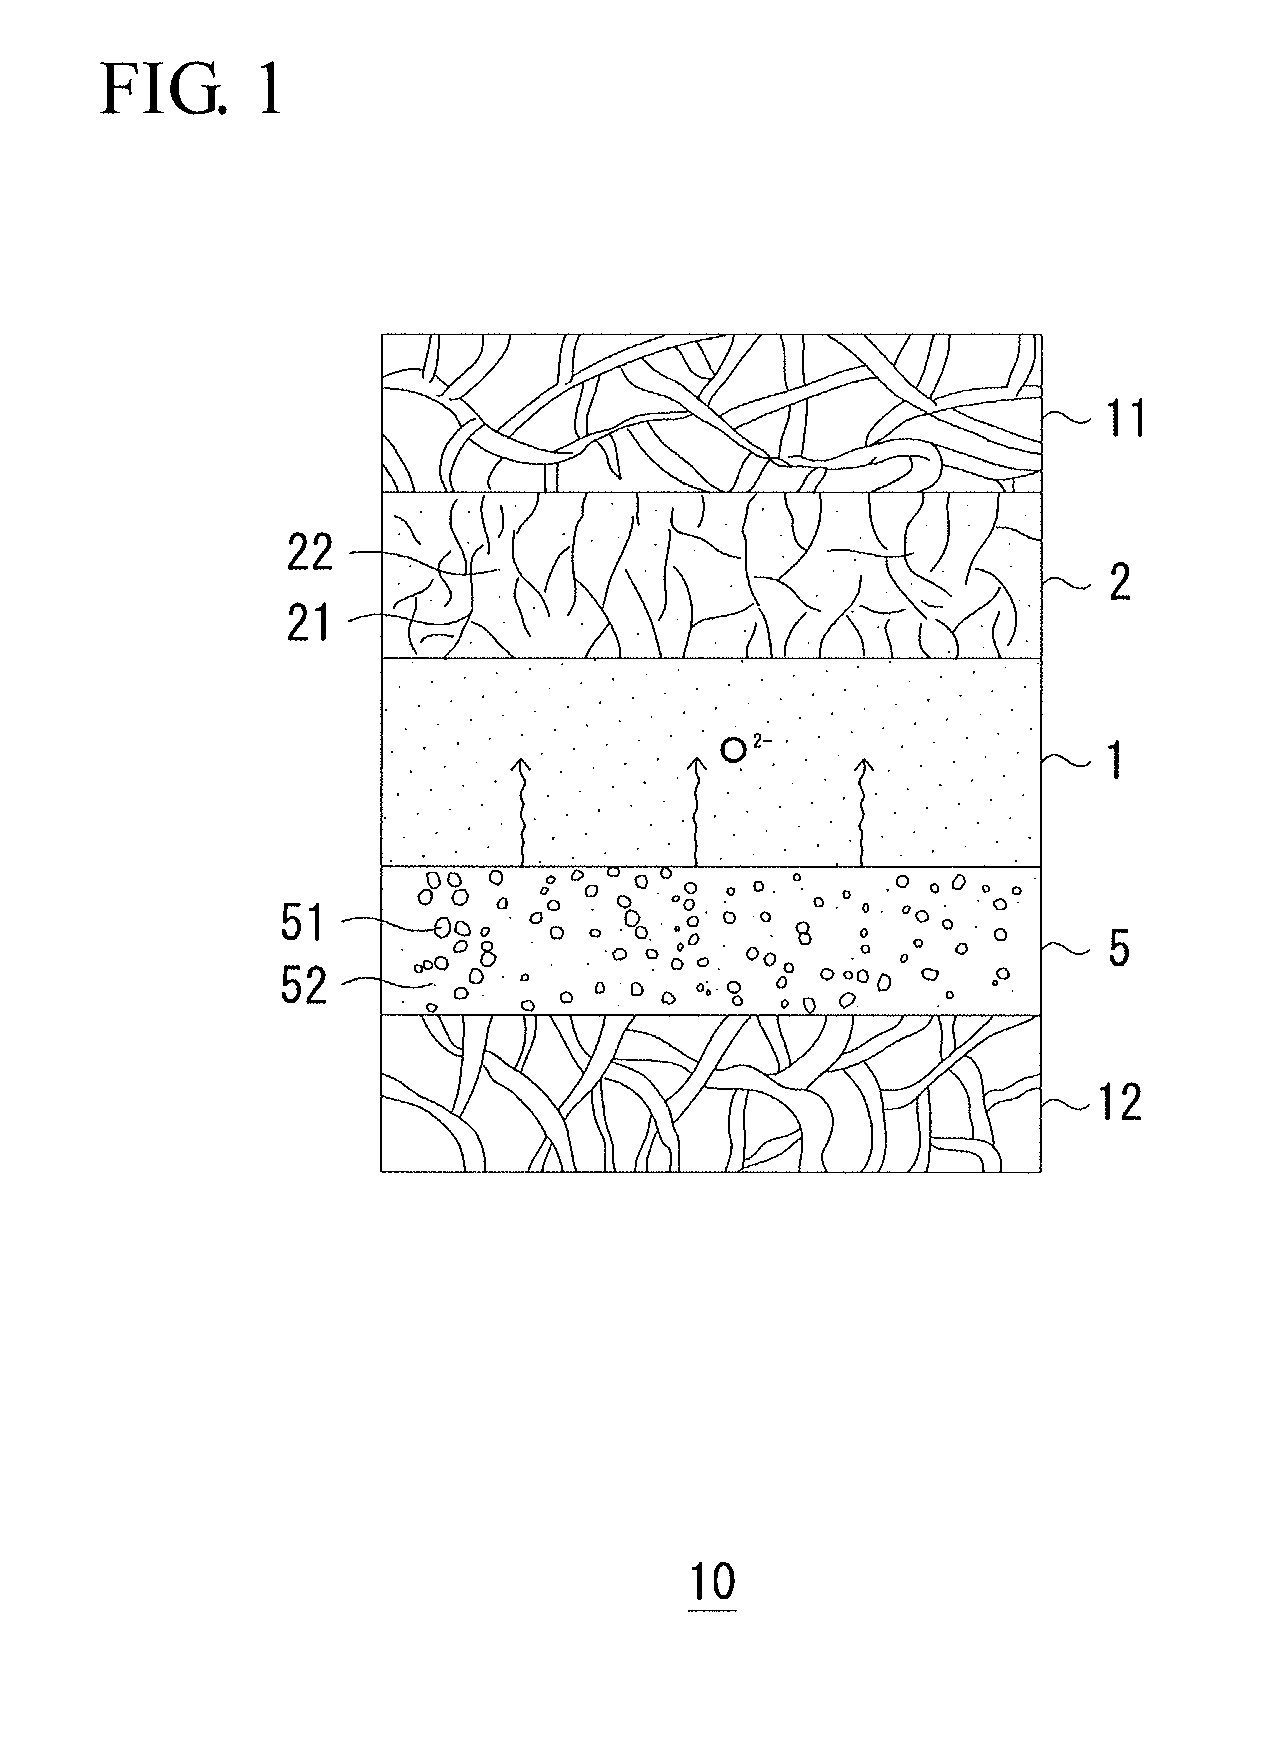 Electrochemical reactor, method for manufacturing the electrochemical reactor, gas decomposing element, ammonia decomposing element, and power generator